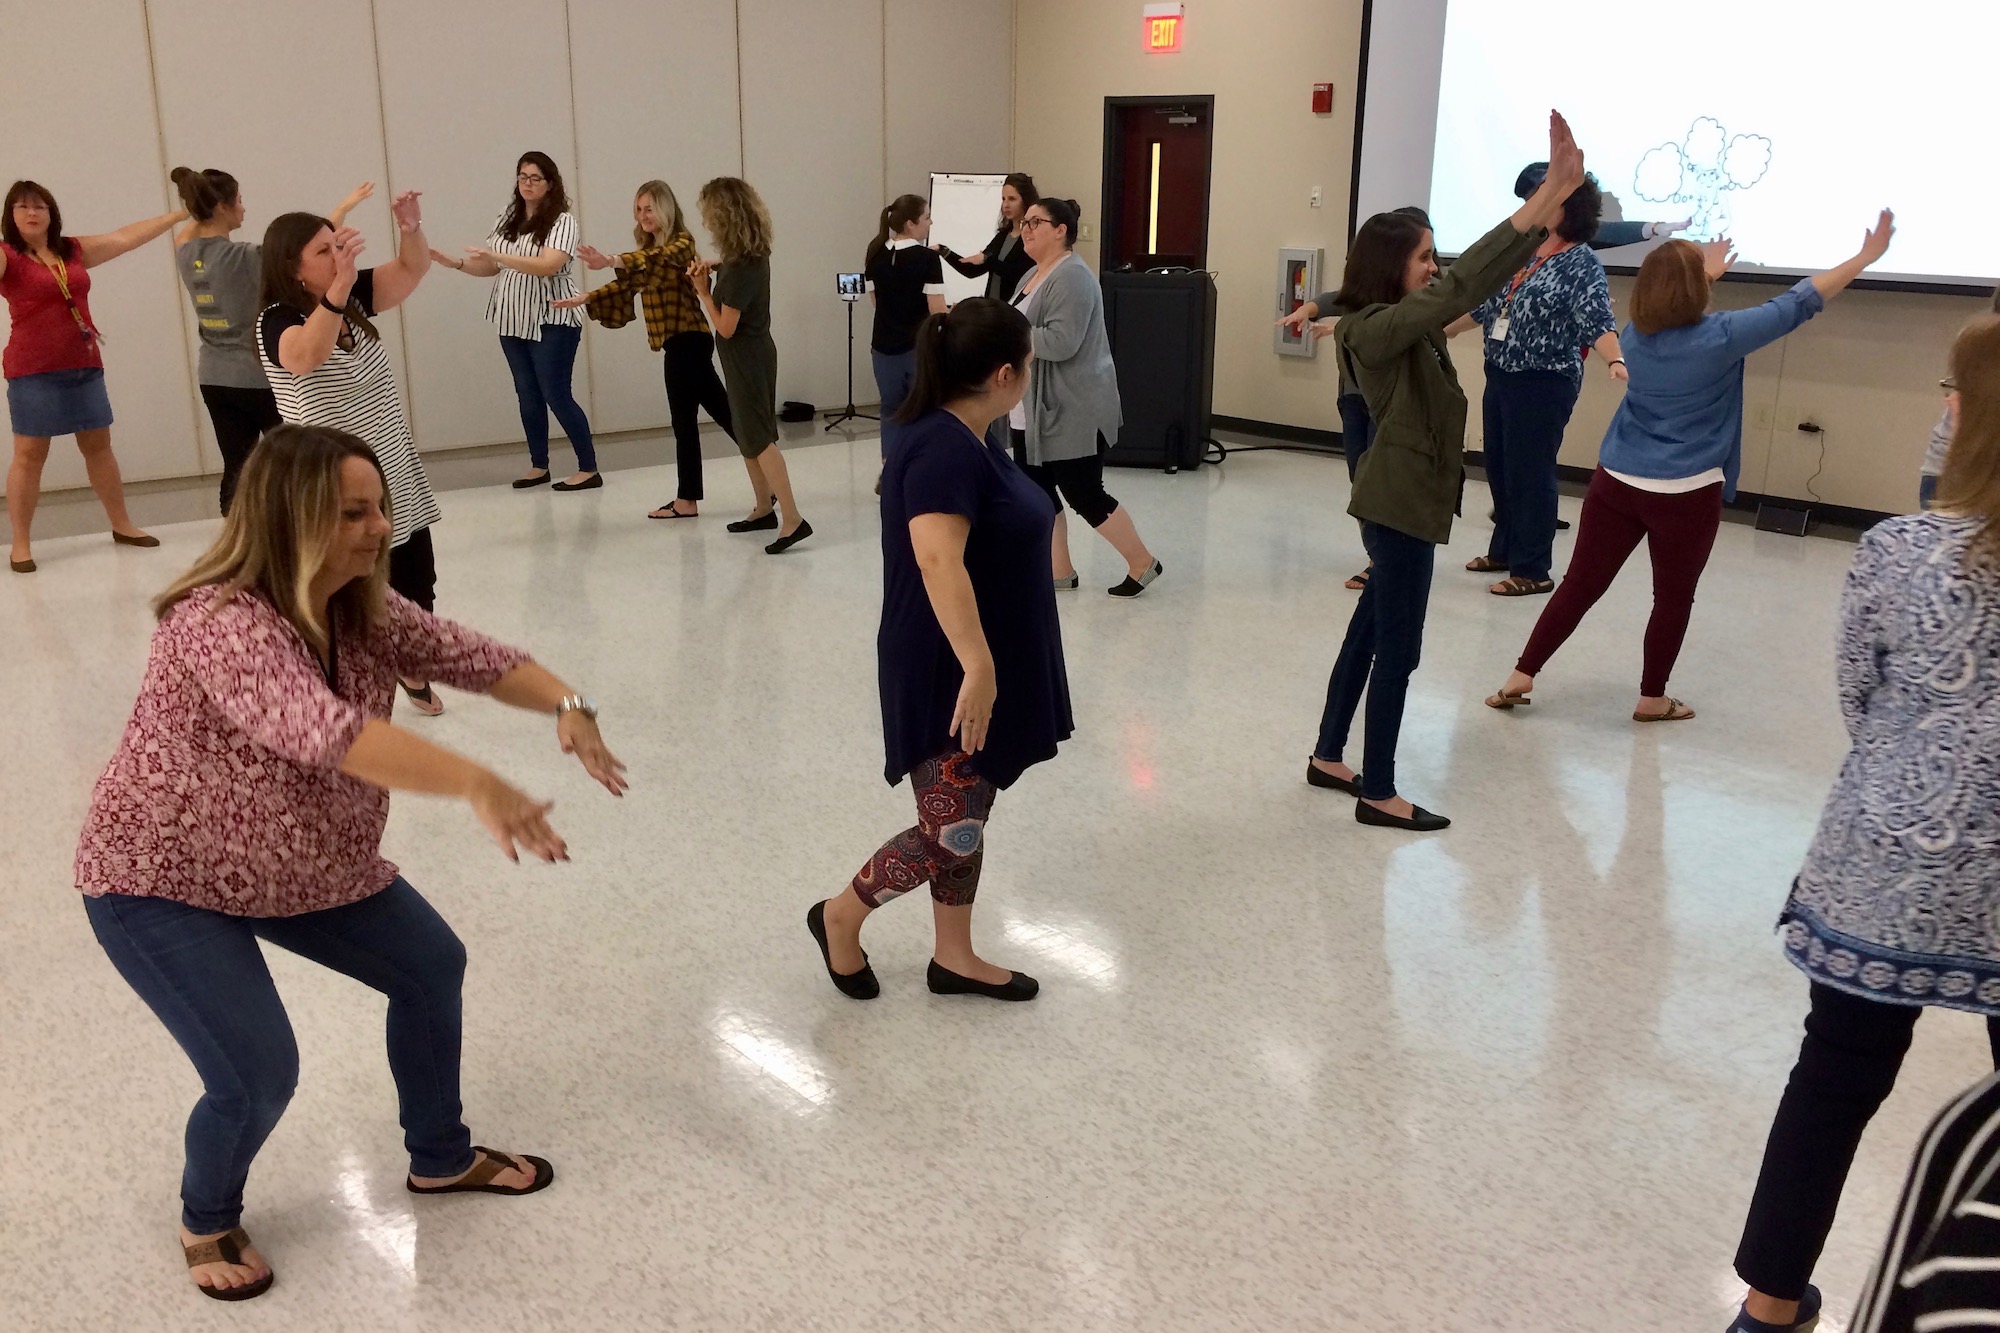 More than 20 local school teachers learned arts integration techniques to help them keep students engaged in learning the arts, such as dance, while learning other subjects, such as science.